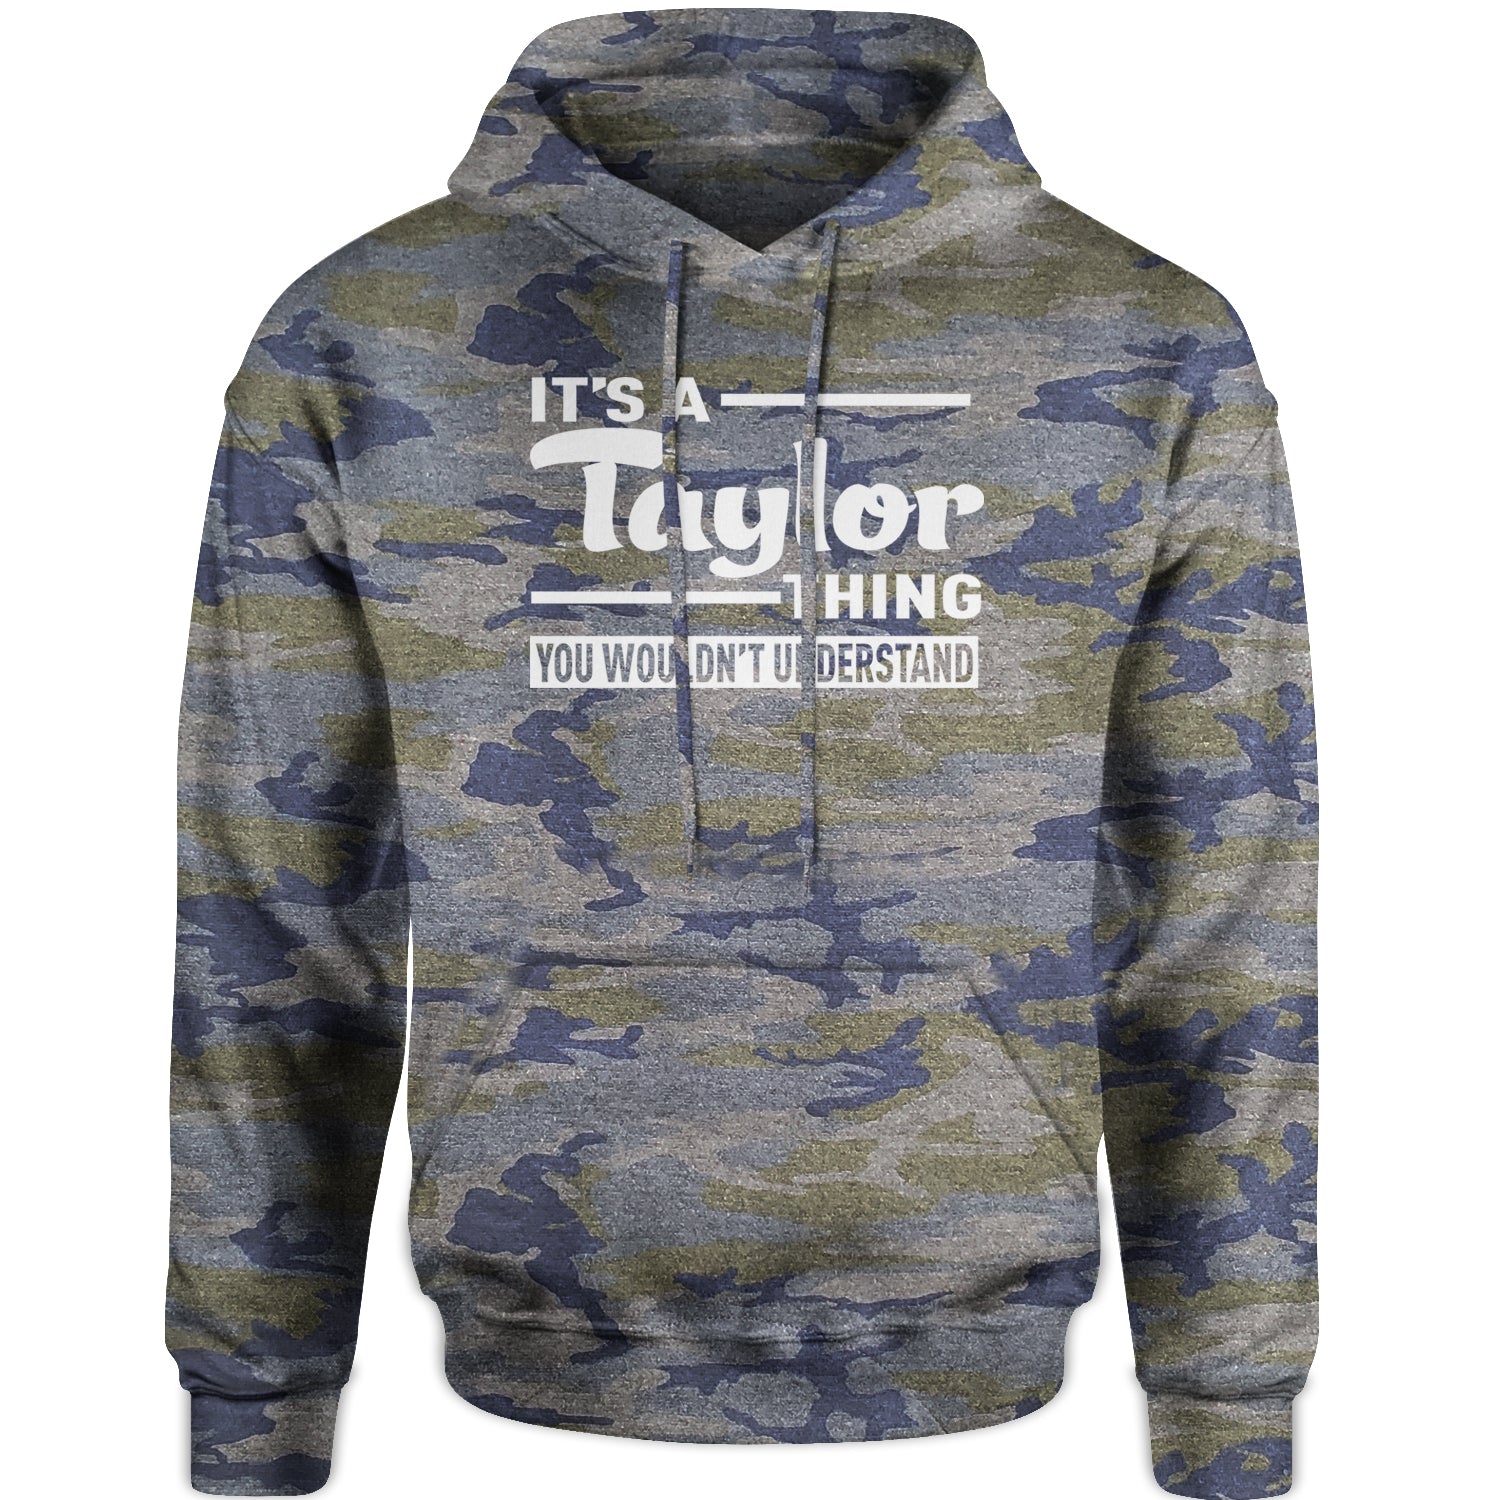 It's A Taylor Thing, You Wouldn't Understand Adult Hoodie Sweatshirt nation, taylornation by Expression Tees